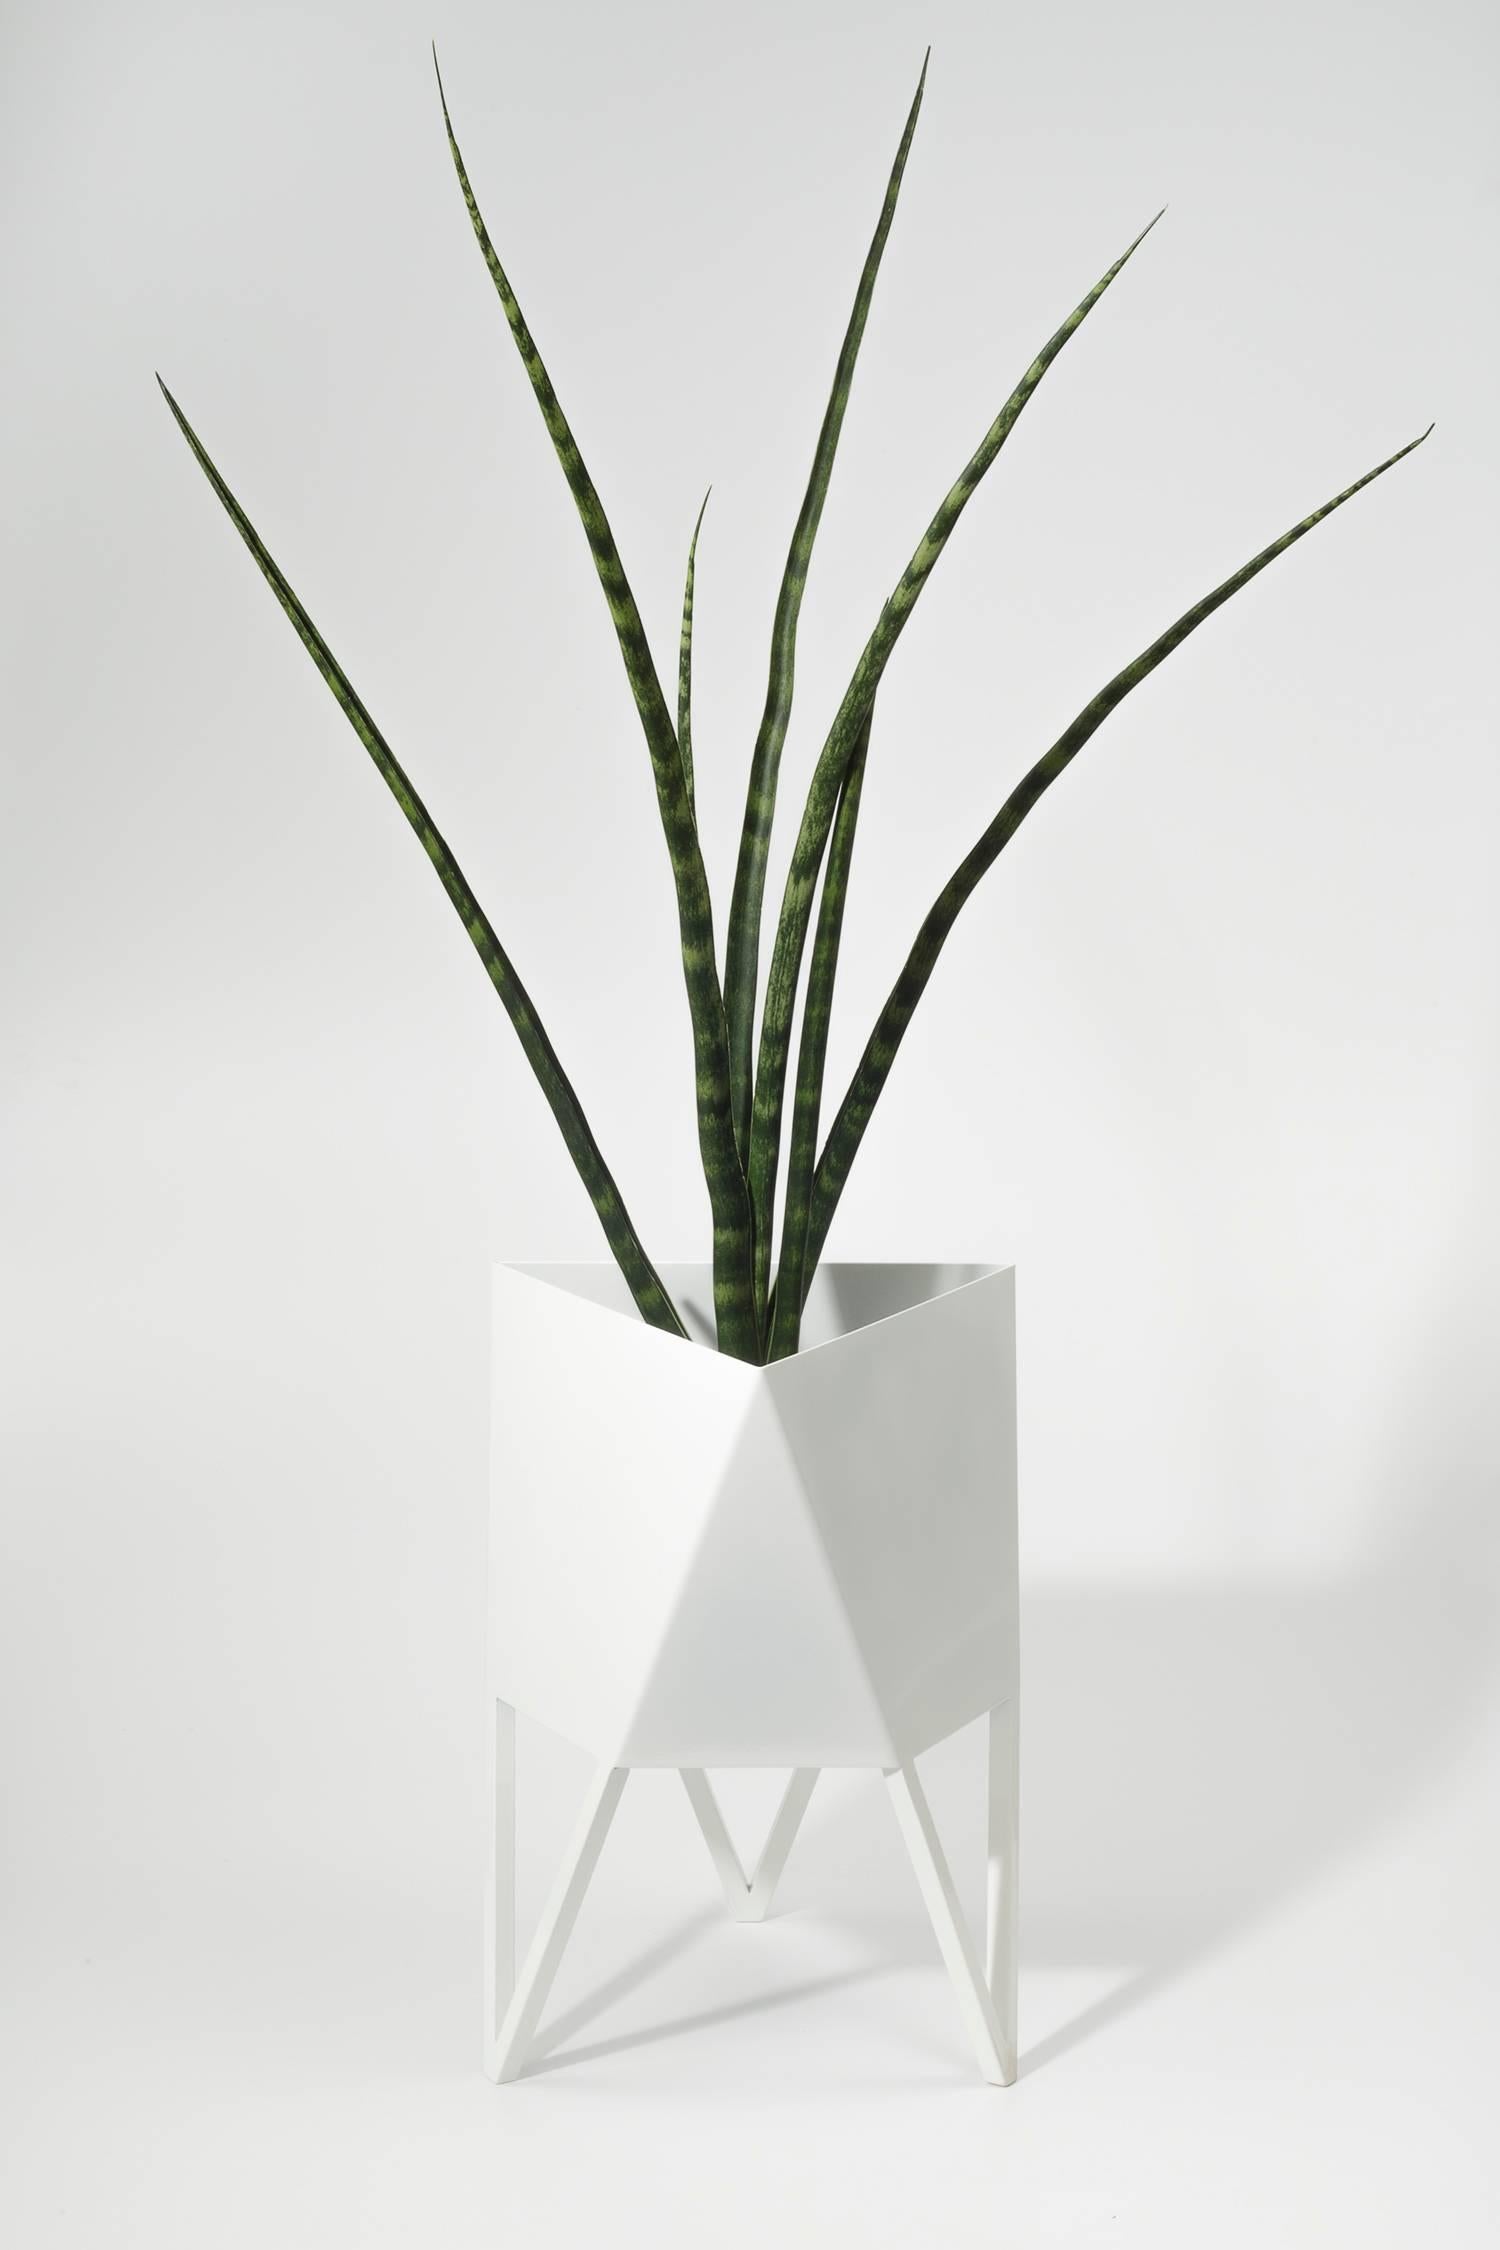 Faceted Deca Planter in Light Pink Steel, Mini, Force/Collide